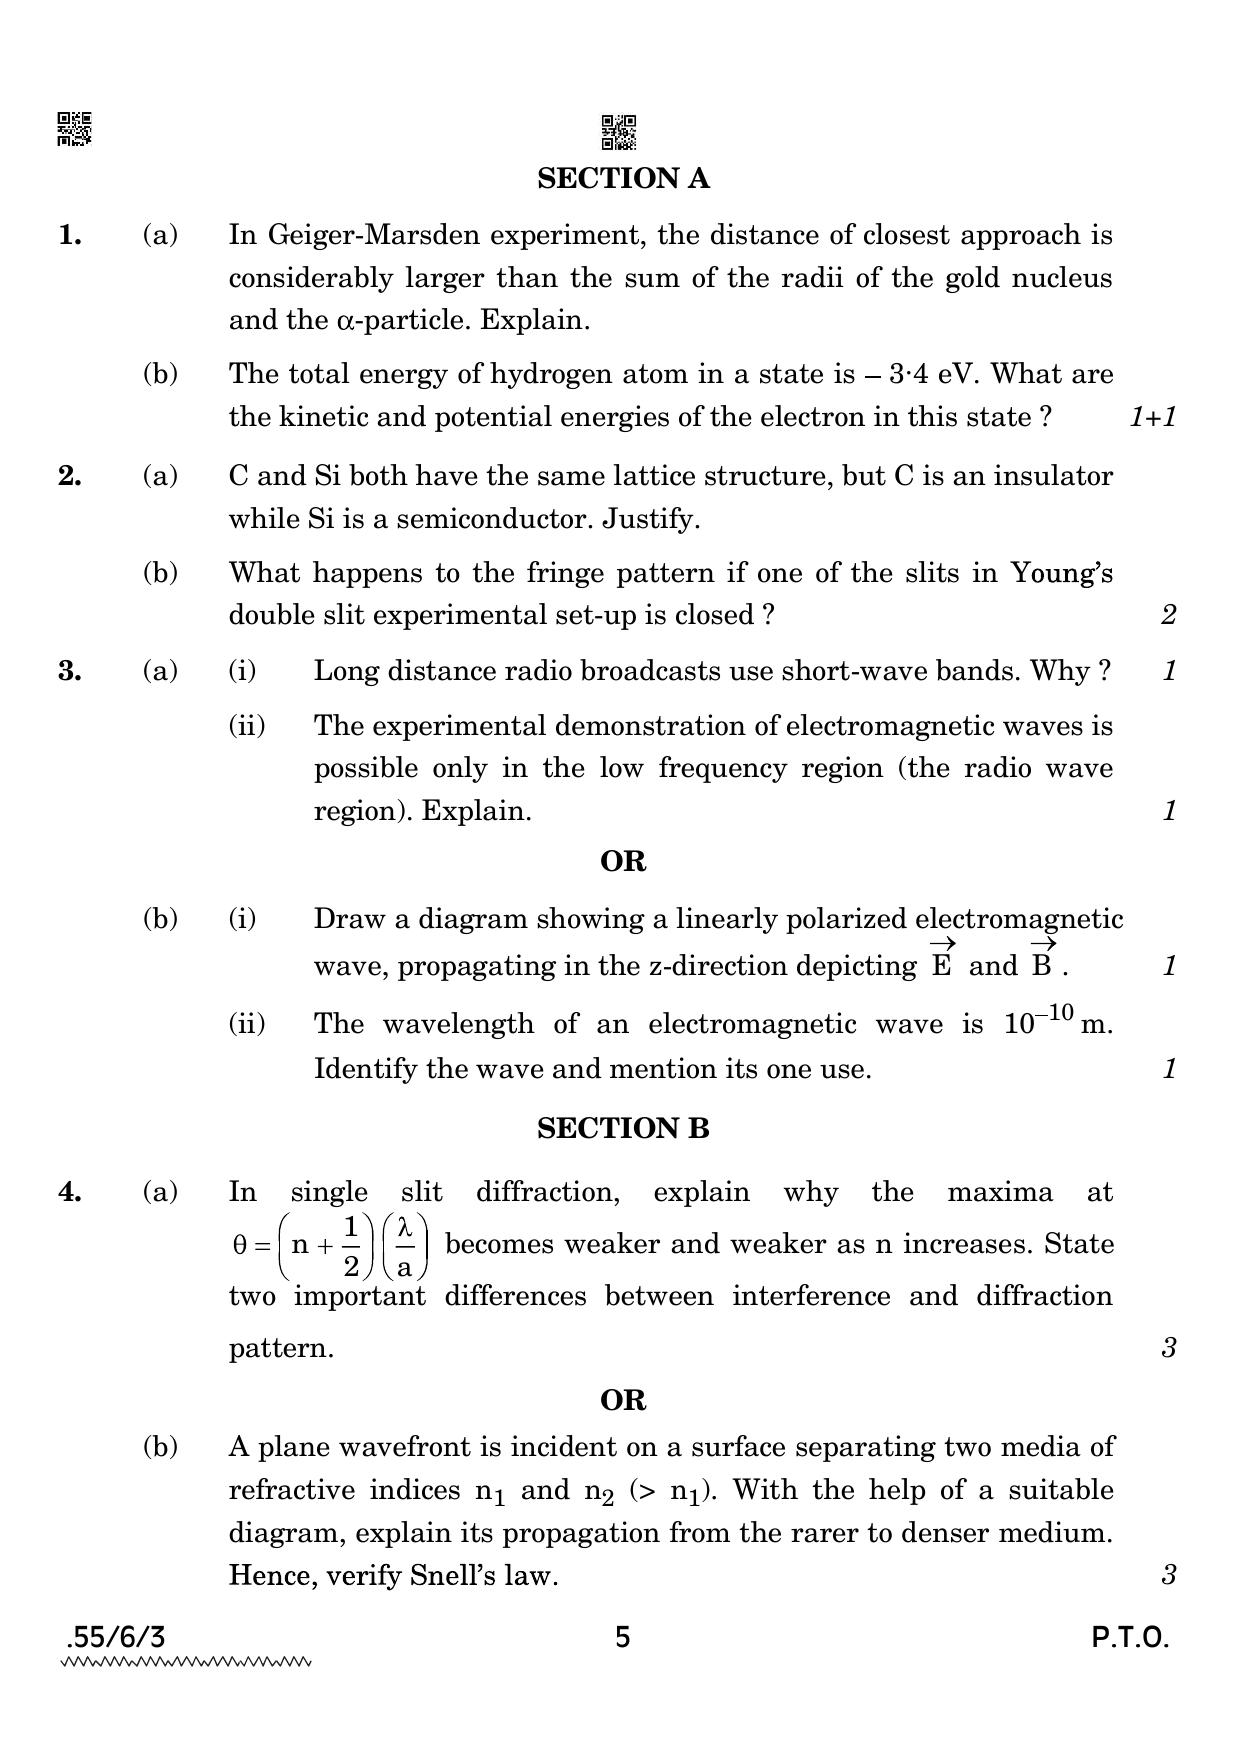 CBSE Class 12 55-6-3 PHYSICS 2022 Compartment Question Paper - Page 5